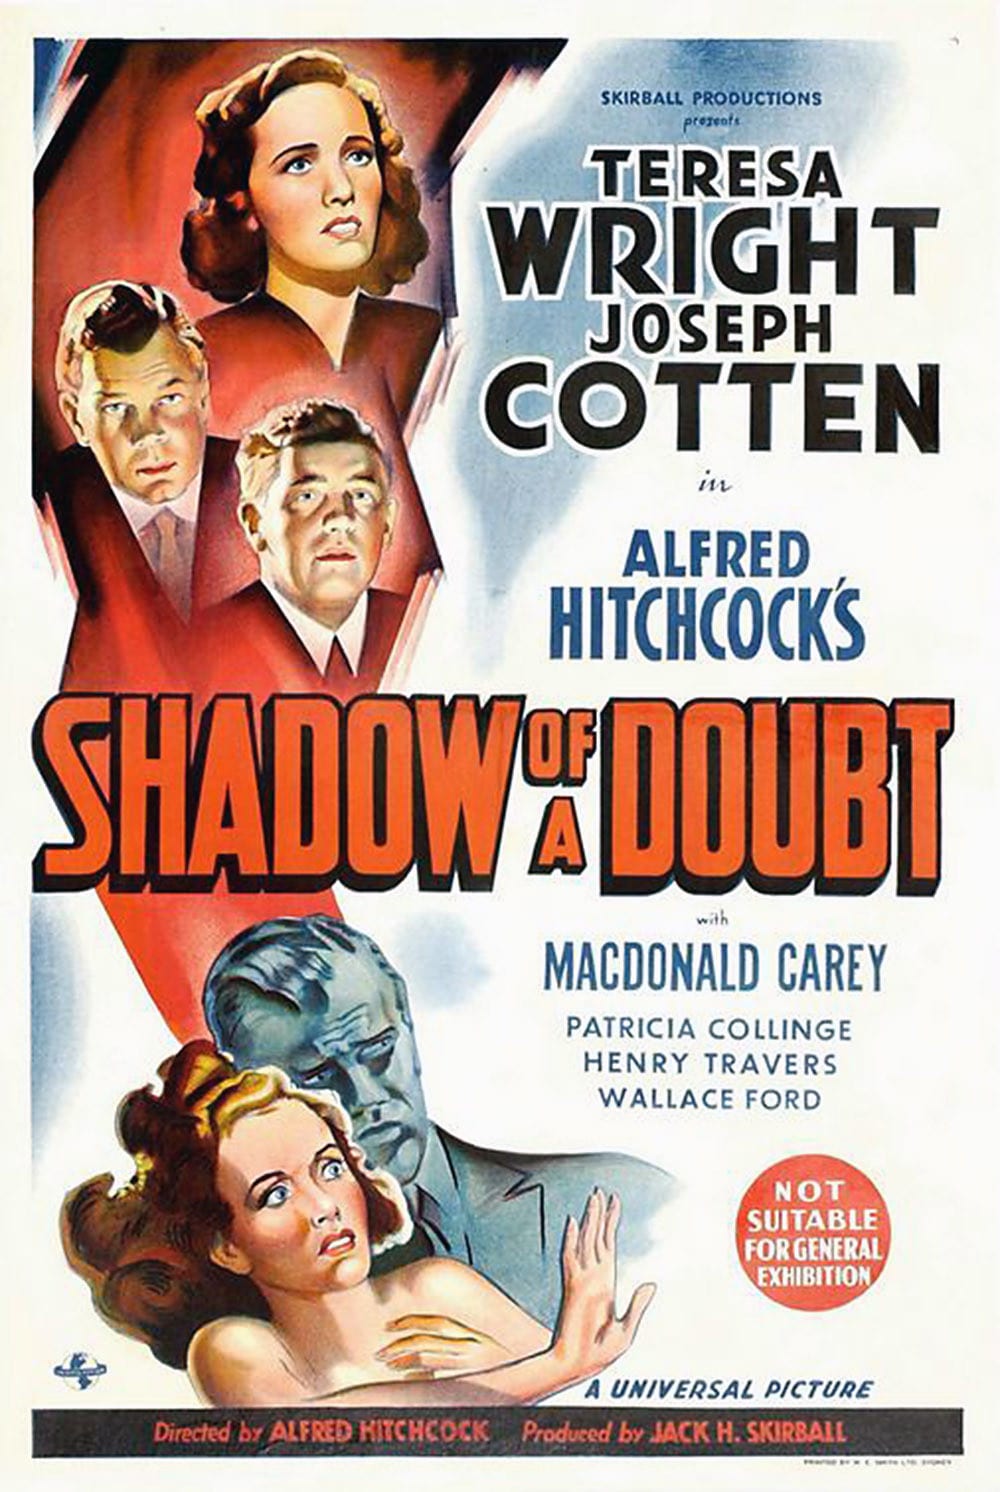 Poster for the movie "Shadow of a Doubt"